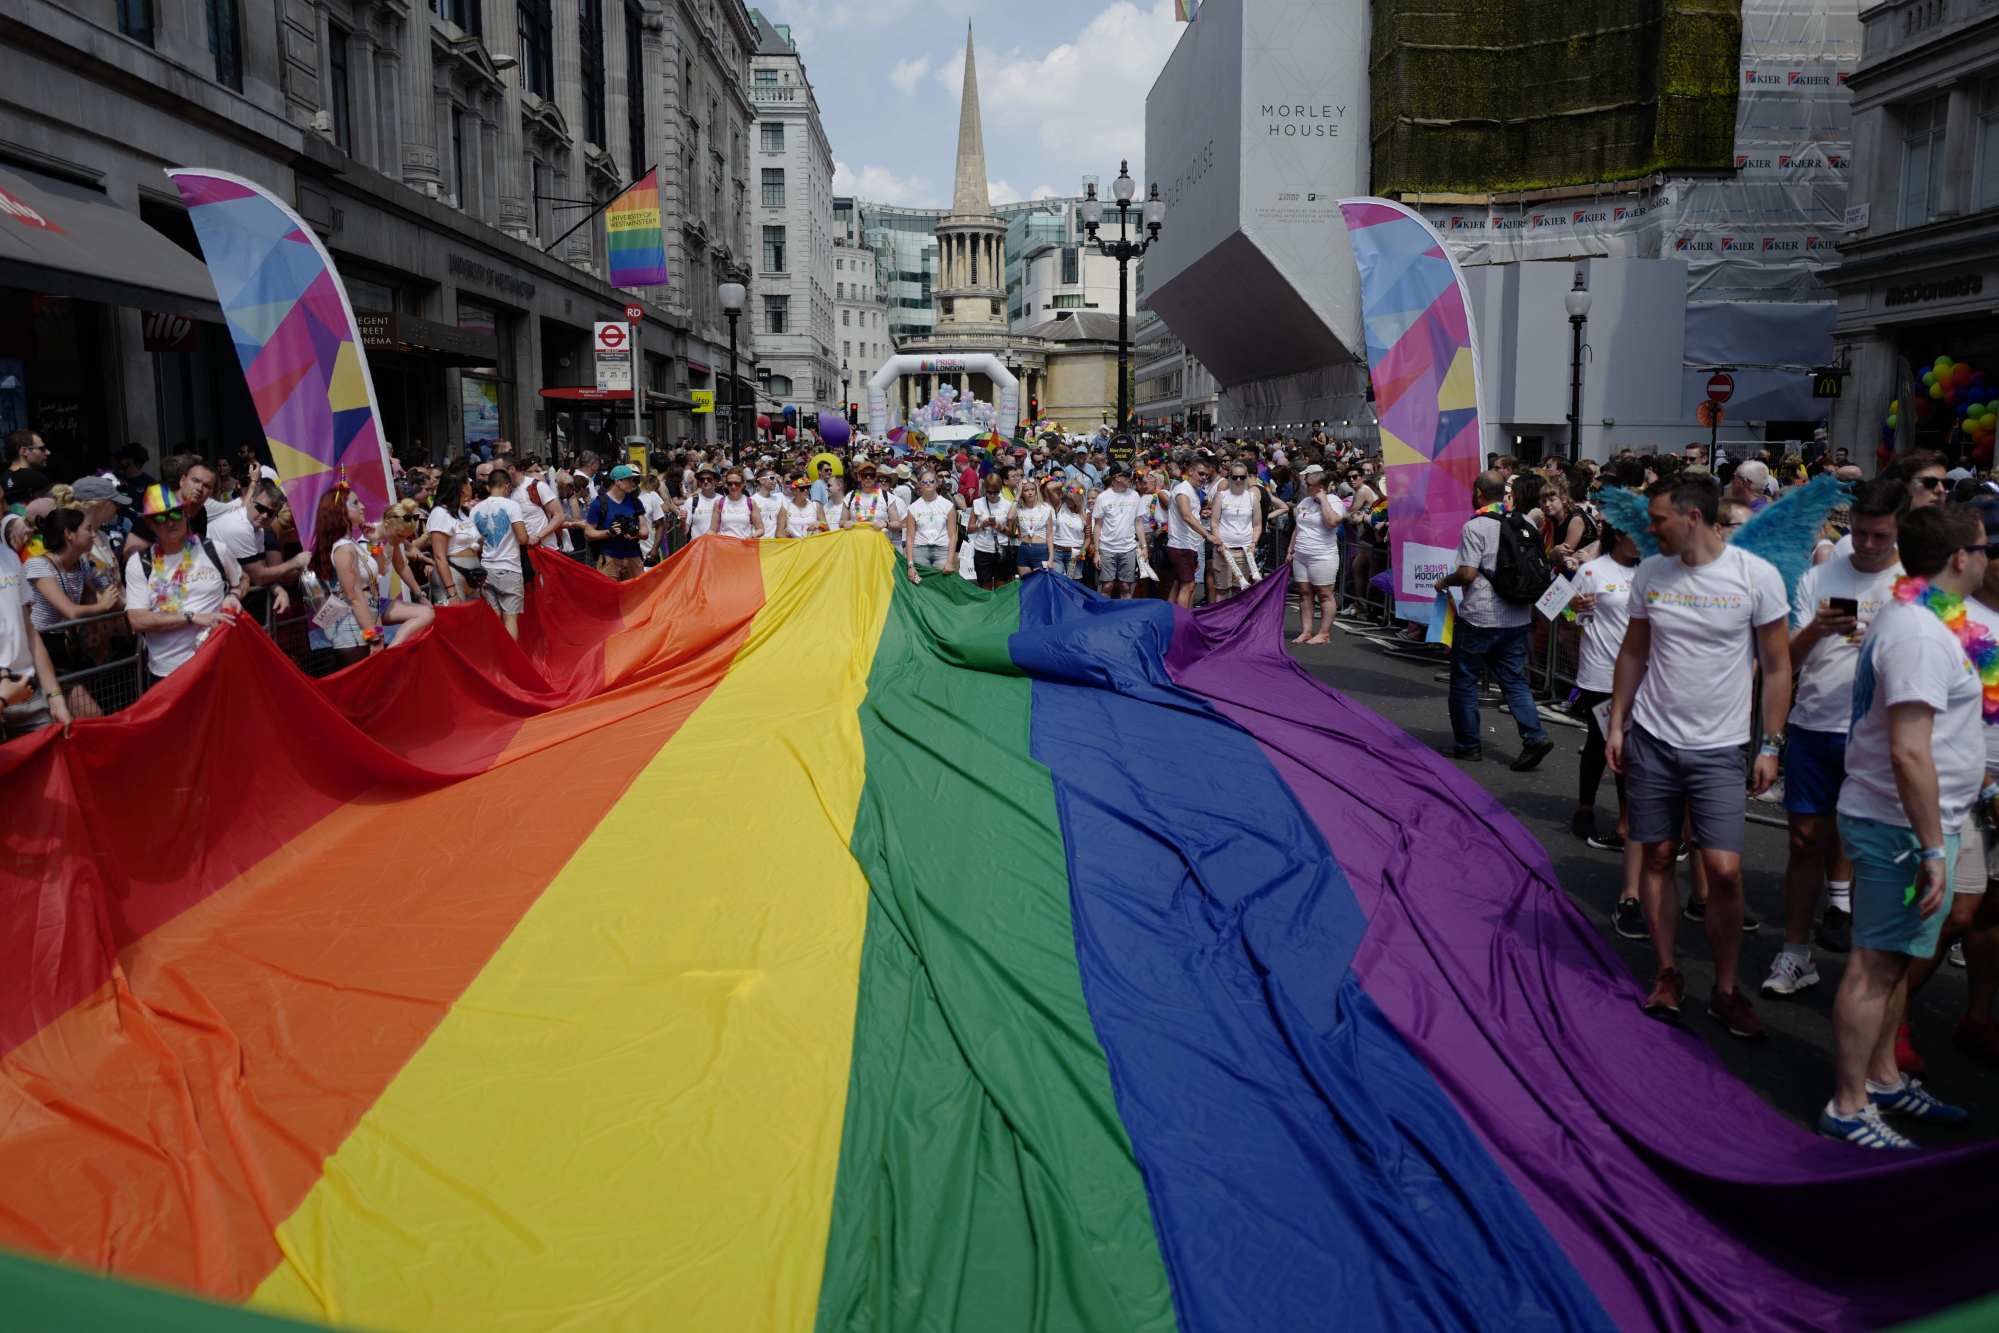 The annual Pride Parade in London on July 7, 2018. Photo: AFP